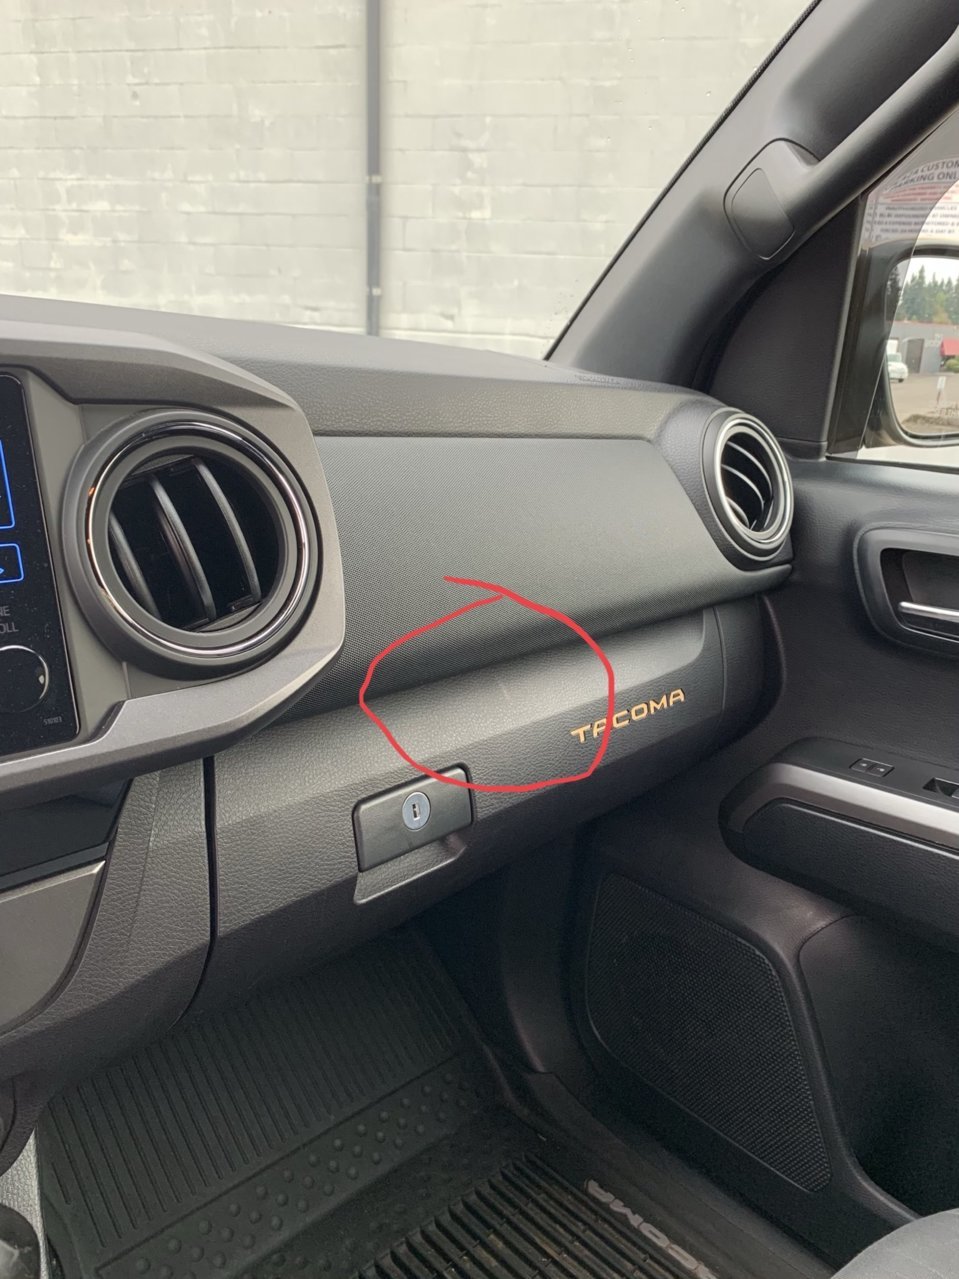 How to Fix Scratched Interior Panels in Your Car